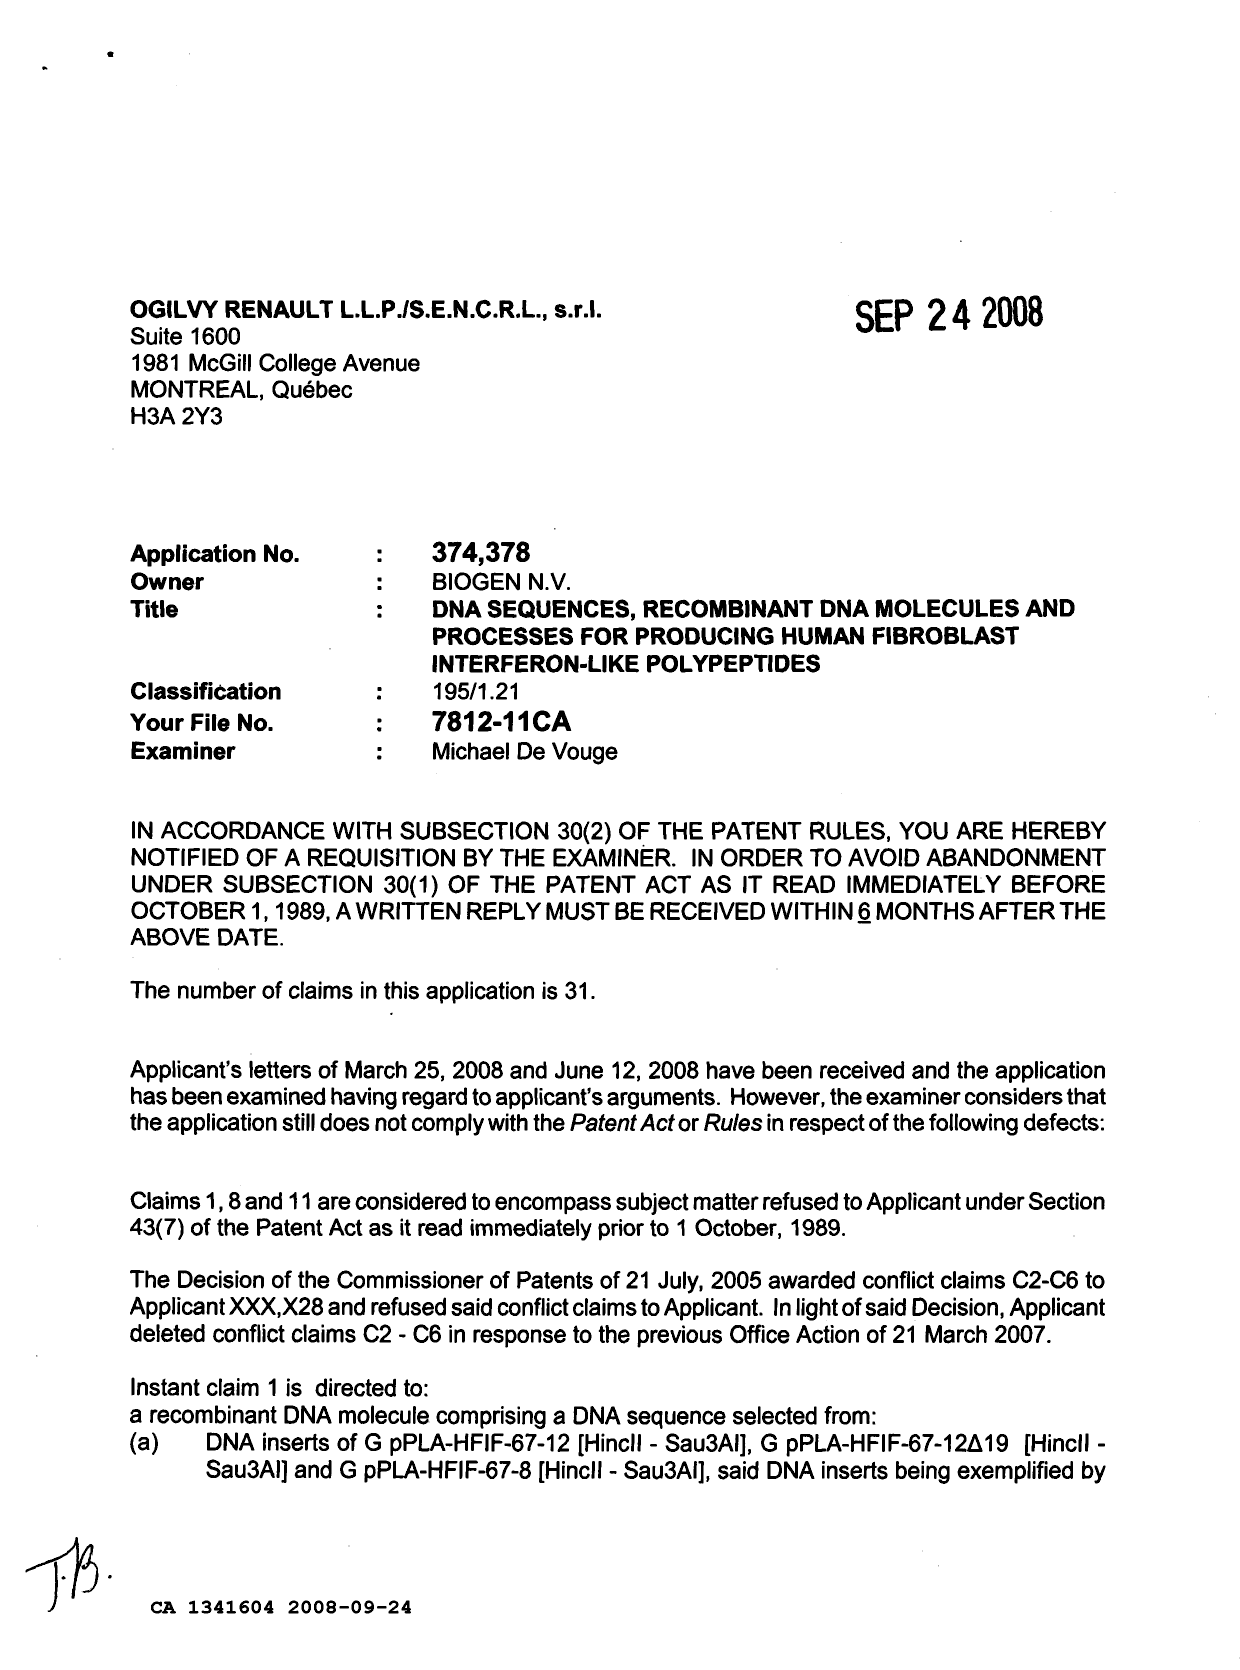 Canadian Patent Document 1341604. Examiner Requisition 20080924. Image 1 of 3